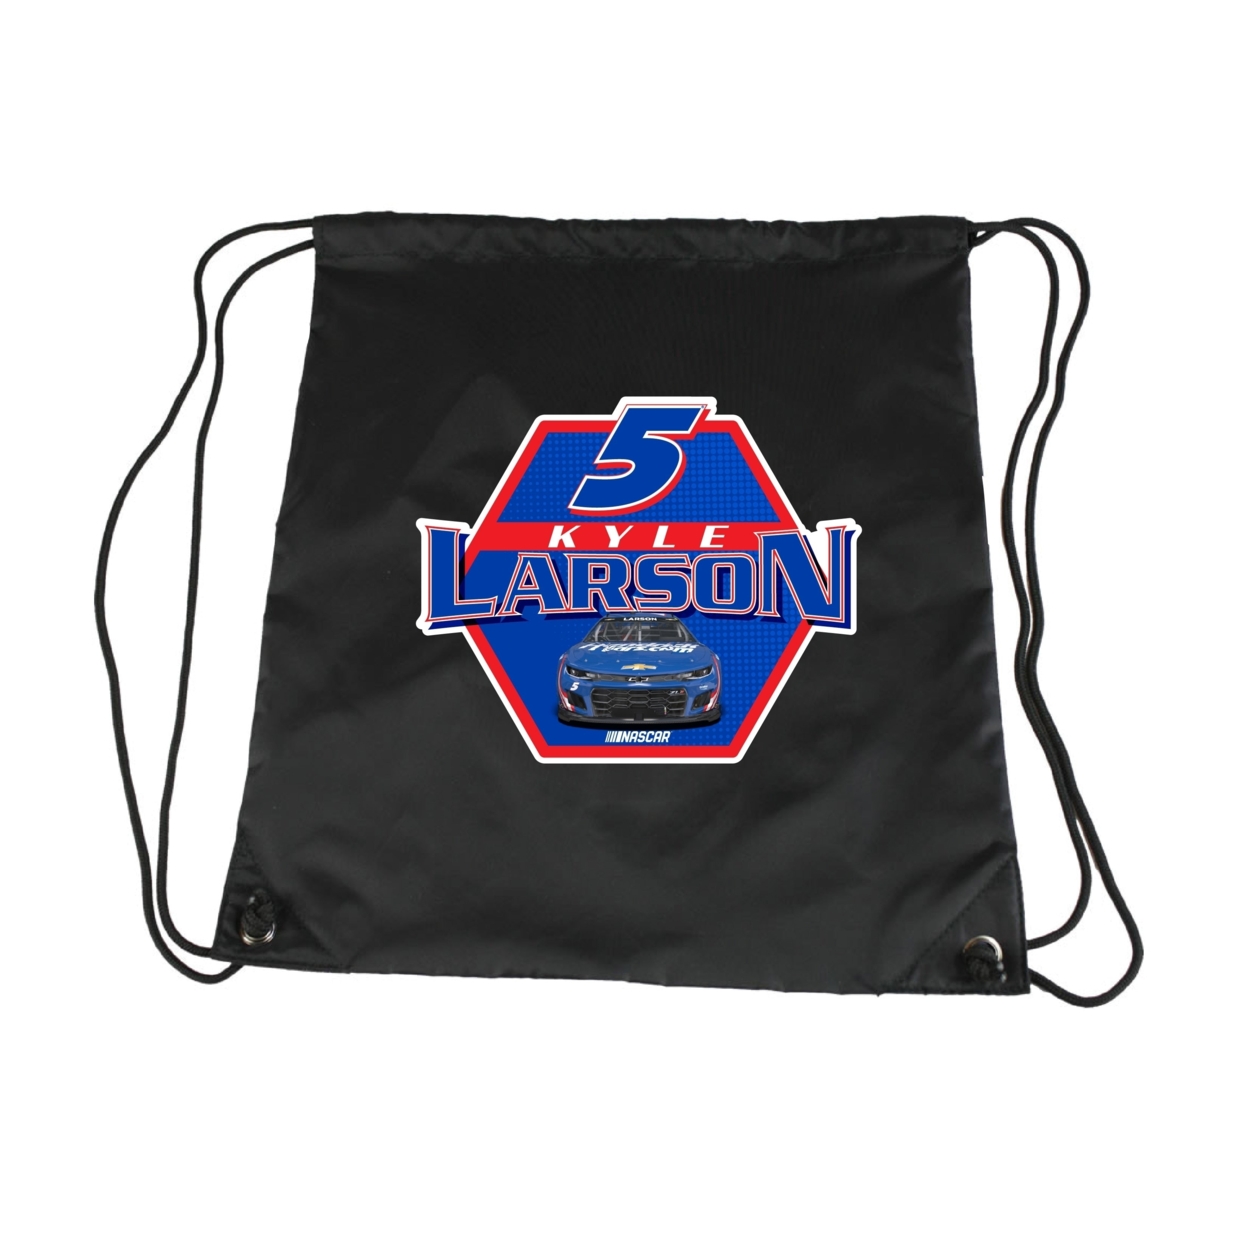 #5 Kyle Larson Officially Licensed Nascar Cinch Bag With Drawstring